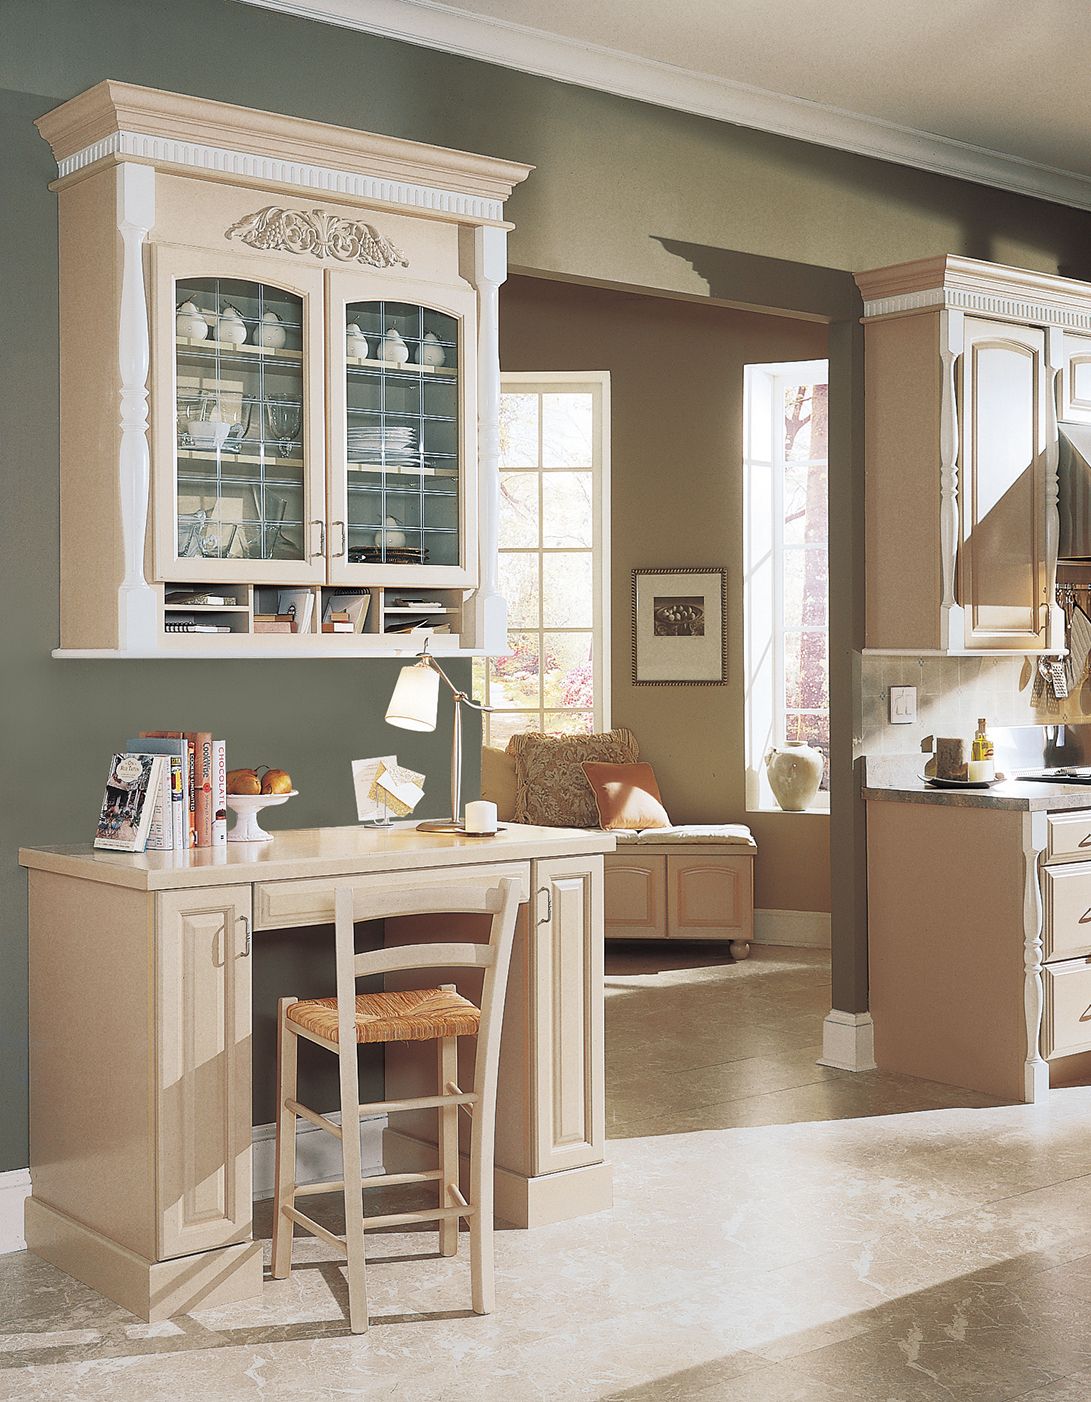 All About Kitchen Cabinets This Old House